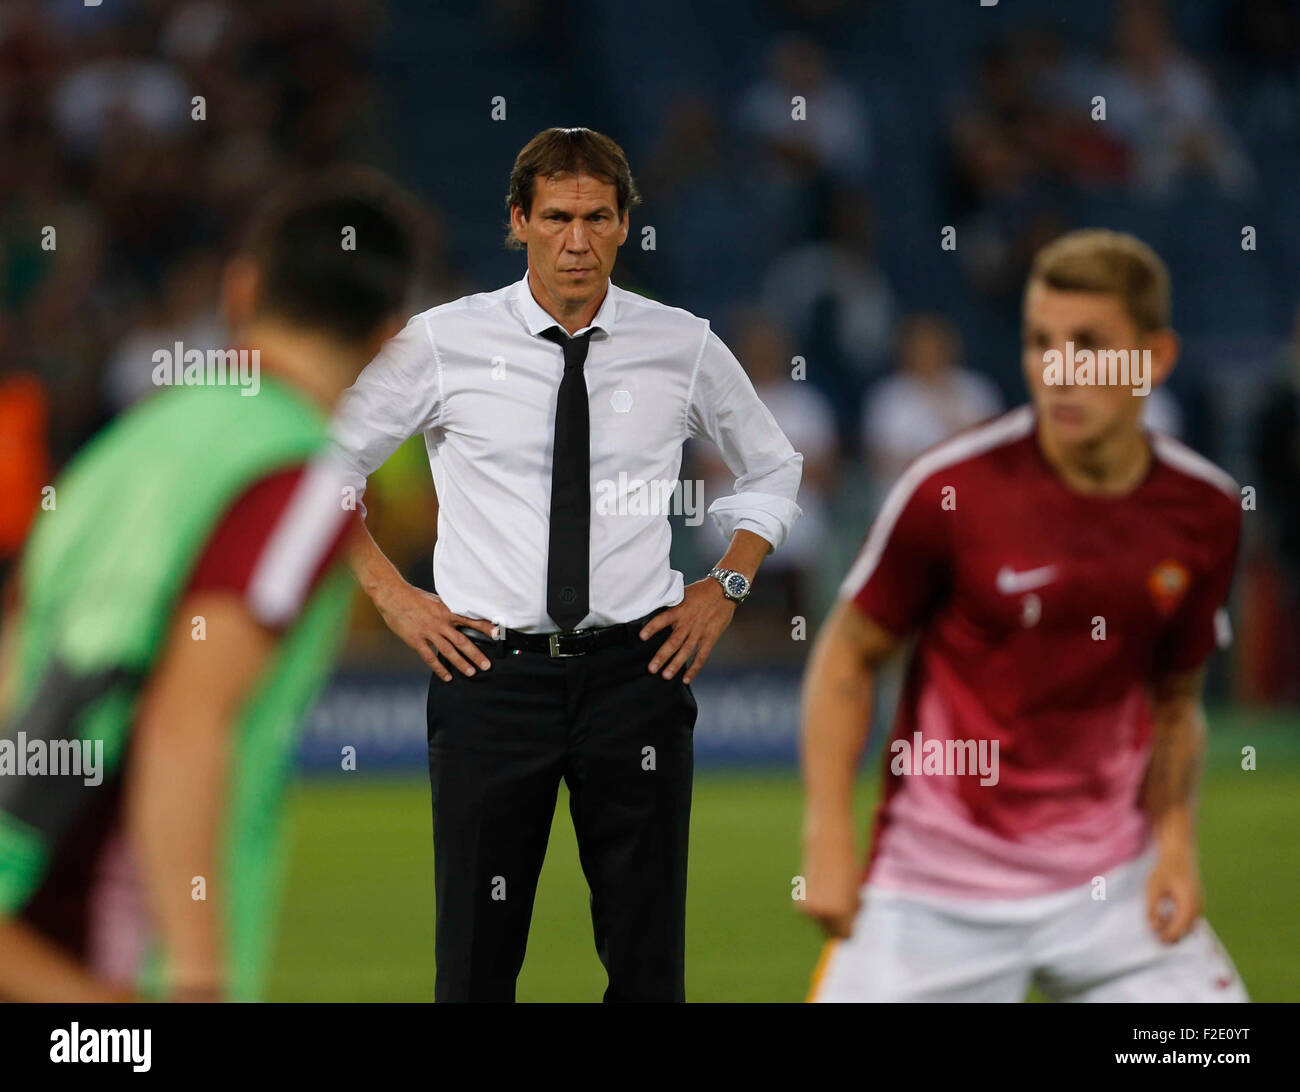 Rome, Italy. 16th Sep, 2015. AS Roma's head coach Rudi Garcia before  the Champions League Group E soccer match against Barcellona  at the Olympic Stadium in Rome September 16, 2015 Credit:  agnfoto/Alamy Live News Stock Photo